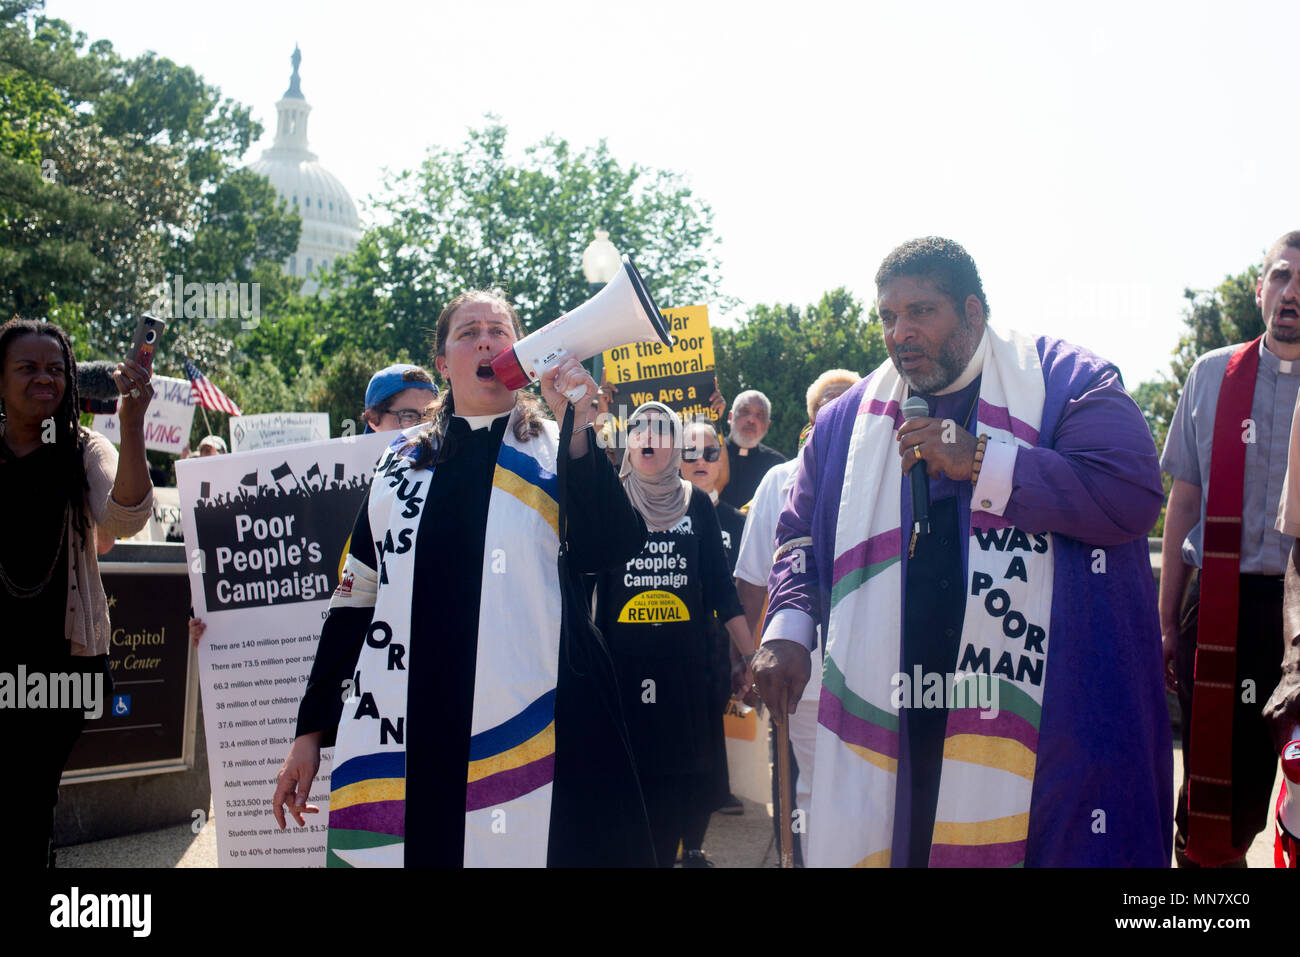 Washington, District of Columbia, USA. 14th May, 2018. Reverend Liz Theoharis and Reverend William Barber lead hundreds of protesters for the Poor People's Campaign at the U.S. Capitol. Several dozen people were arrested and later released. Credit: Erin Scott/ZUMA Wire/Alamy Live News Stock Photo